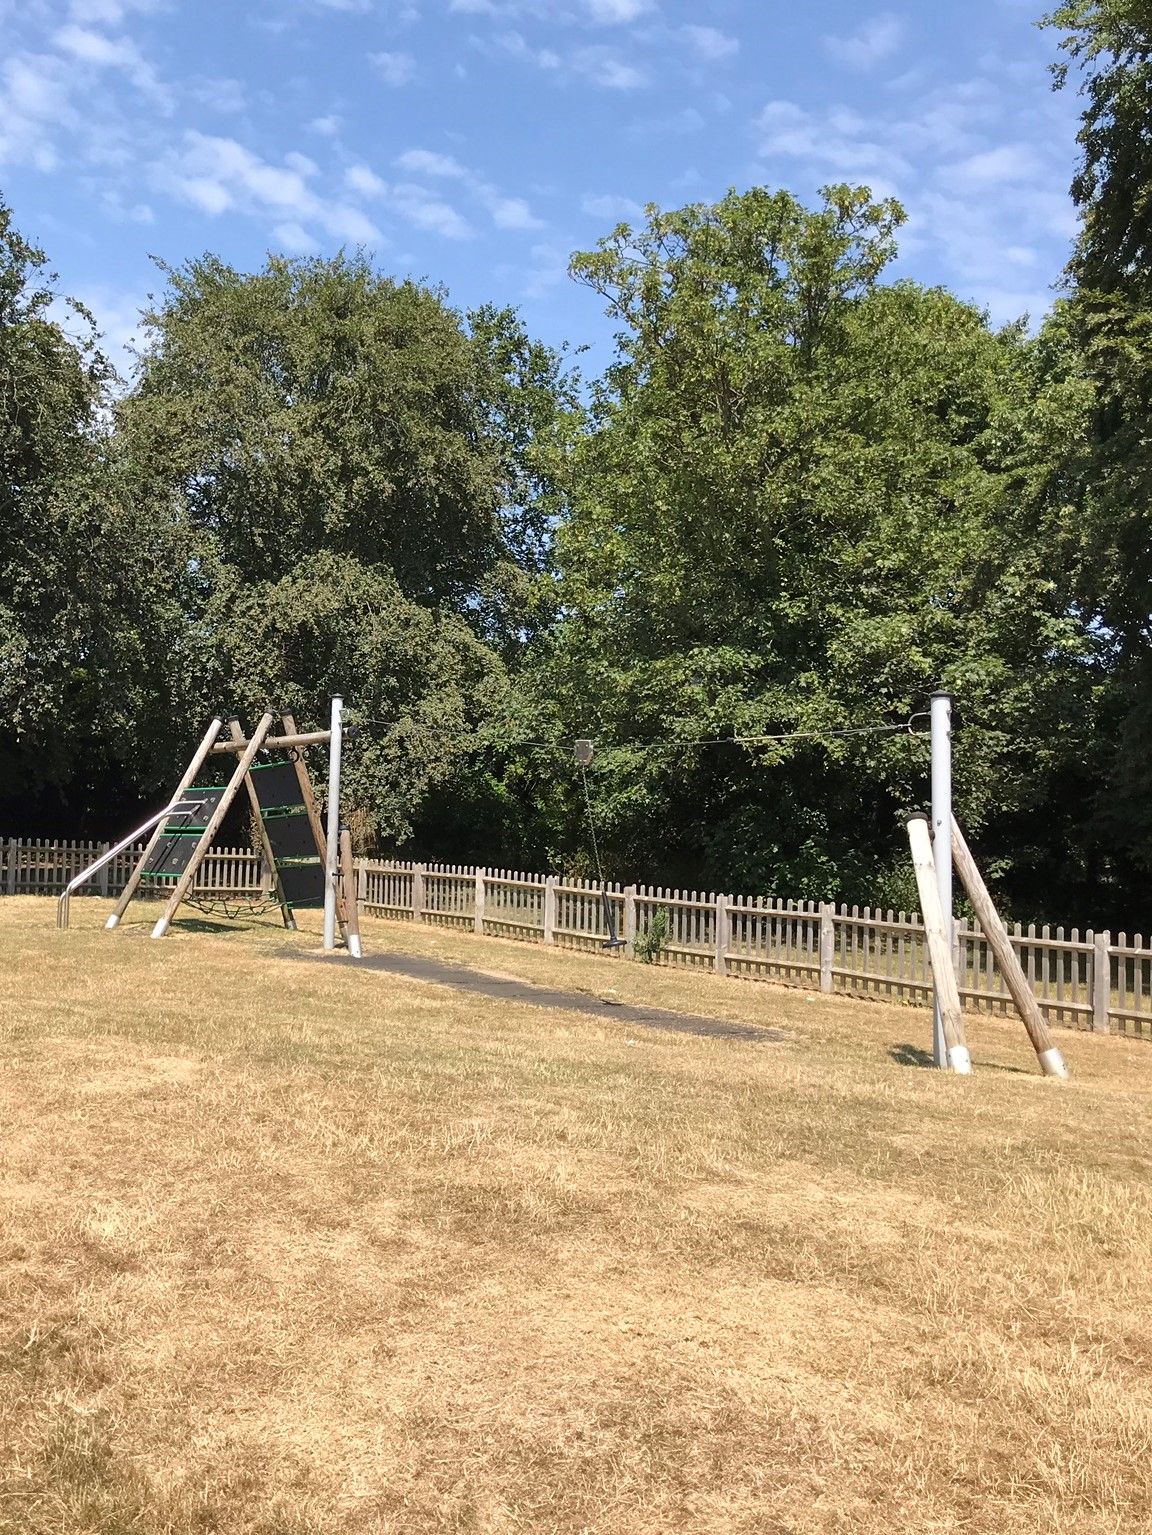 The zipwire in the children's play area.